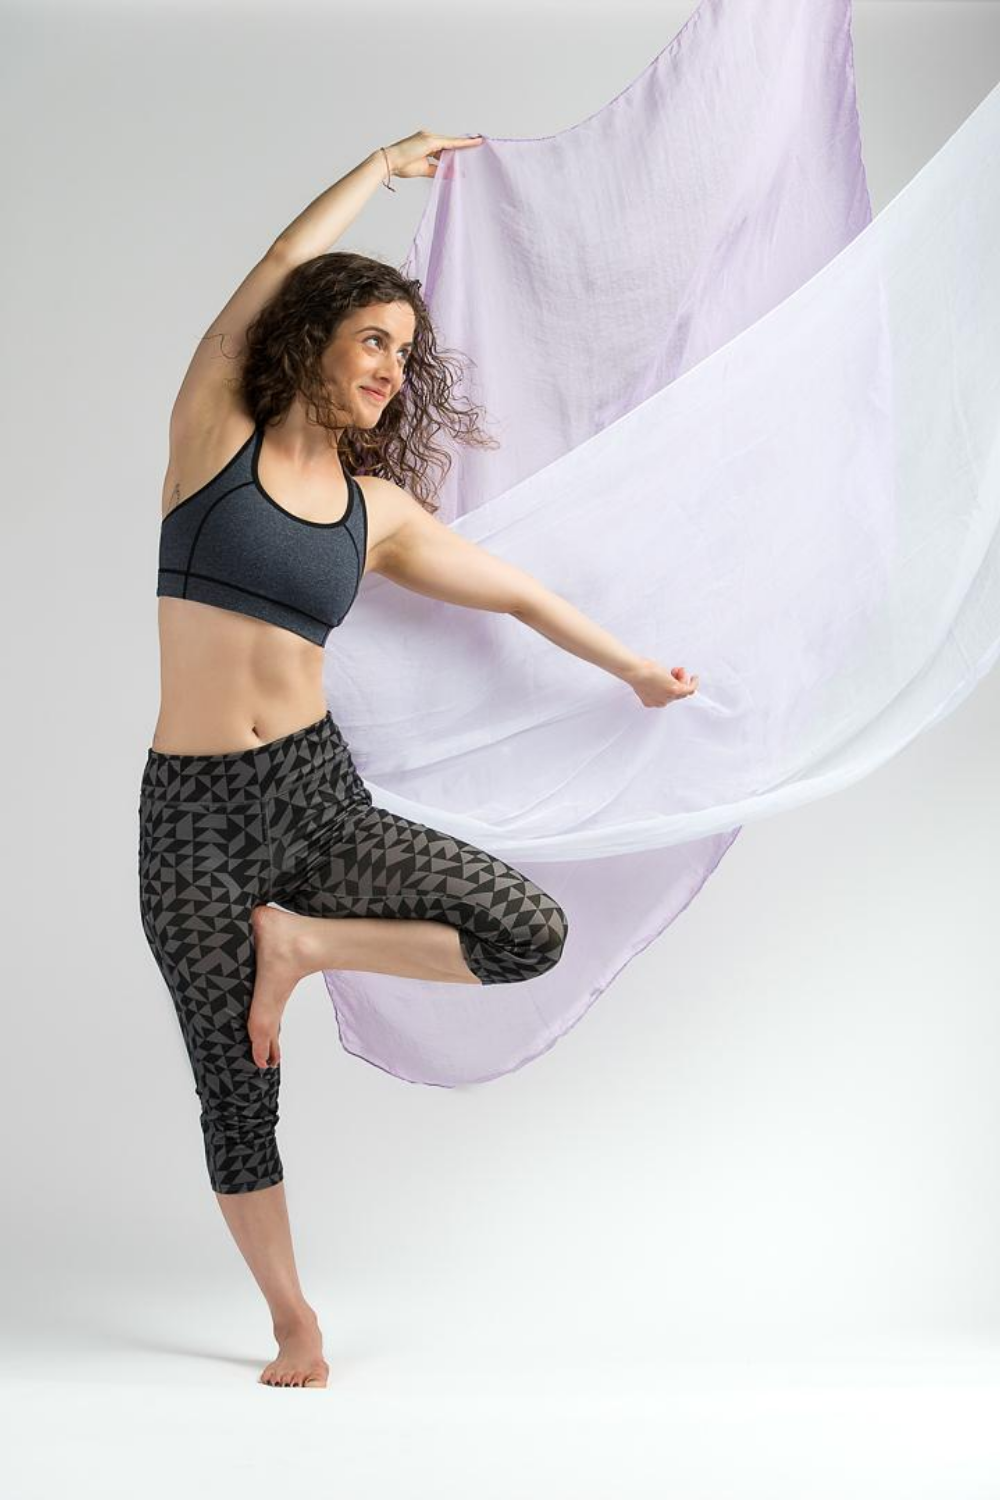 Eco-friendly yoga clothes are essential for the yogi who wants to align their values with their shopping practices.Bamboo, hemp, and organic cotton are all natural fabrics that have a low impact on the environment. www.alittlesustainability.com